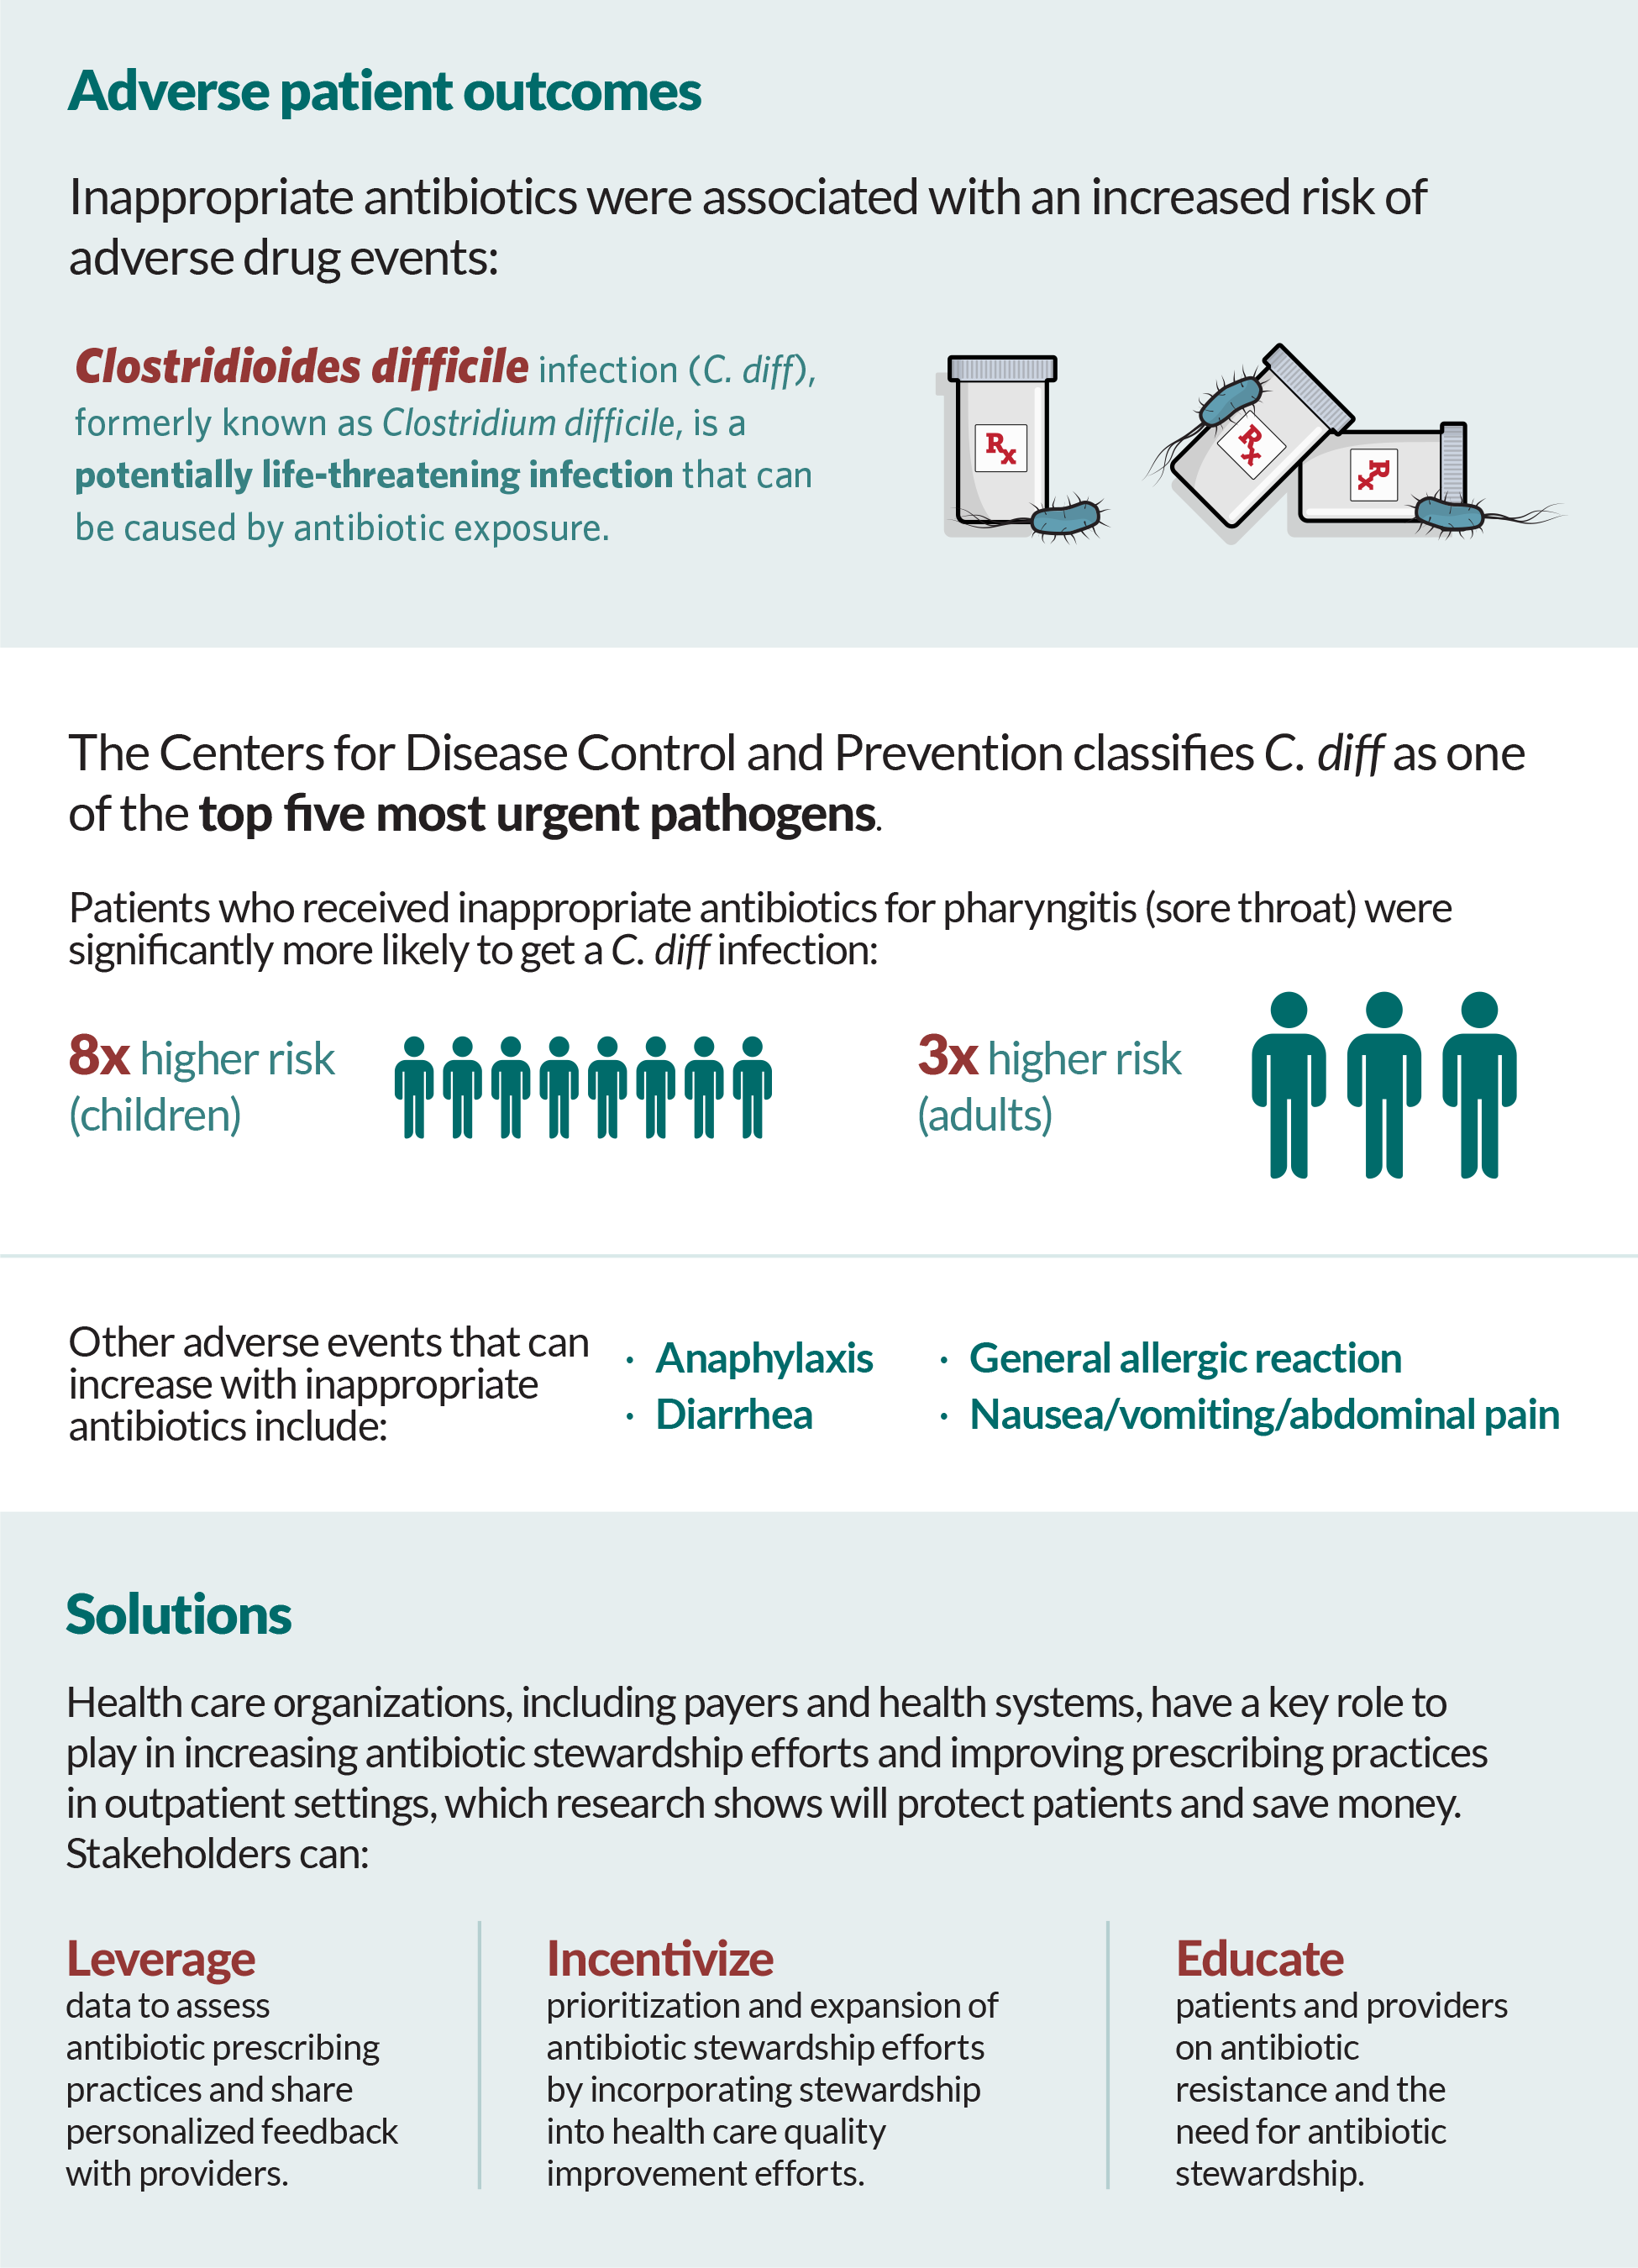 Adverse patient outcomes. Inappropriate antibiotics were associated with an increased risk of adverse drug events: Clostridioides difficile infection (C. diff), formerly known as Clostridium difficile, is a potentially life-threatening infection that can be caused by antibiotic exposure. The Centers for Disease Control and Prevention classifies C. diff as one of the top five most urgent pathogens. Patients who received inappropriate antibiotics for pharyngitis (sore throat) were significantly more likely to get a C. diff infection: 8x higher risk (children), 3x higher risk (adults). Other adverse events that increase with inappropriate antibiotics include: Anaphylaxis, Diarrhea, General allergic reaction, Nausea/vomiting/abdominal pain. Solutions. Health care organizations, including payers and health systems, have a key role to play in increasing antibiotic stewardship efforts and improving prescribing practices in outpatient settings, which research shows will protect patients and save money. Stakeholders can: Leverage data to assess antibiotic prescribing practices and share personalized feedback with providers. Incentivize prioritization and expansion of antibiotic stewardship efforts by incorporating stewardship into health care quality improvement efforts. Educate patients and providers on antibiotic resistance and the need for antibiotic stewardship. 